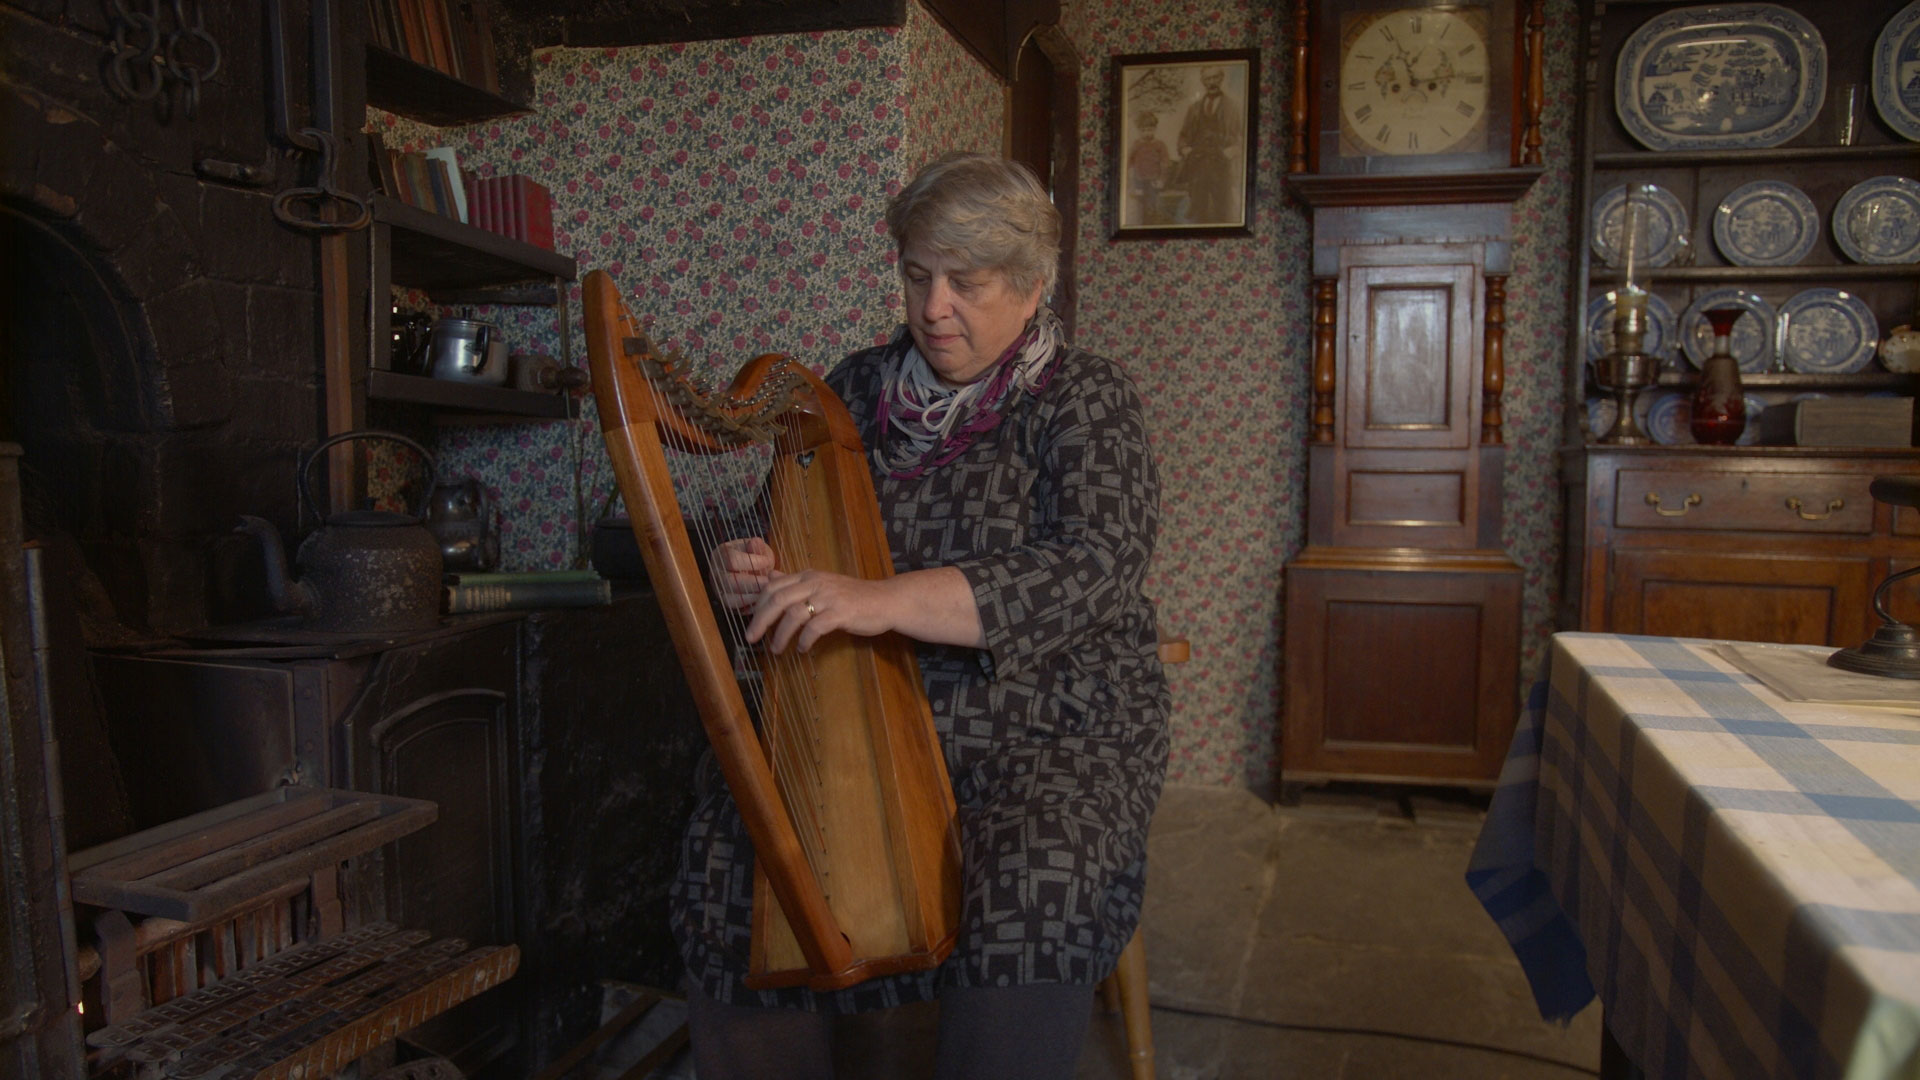 A still from a video of Mair Tomos Ifans reciting a story in front of the fire at Yr Ysgwrn.